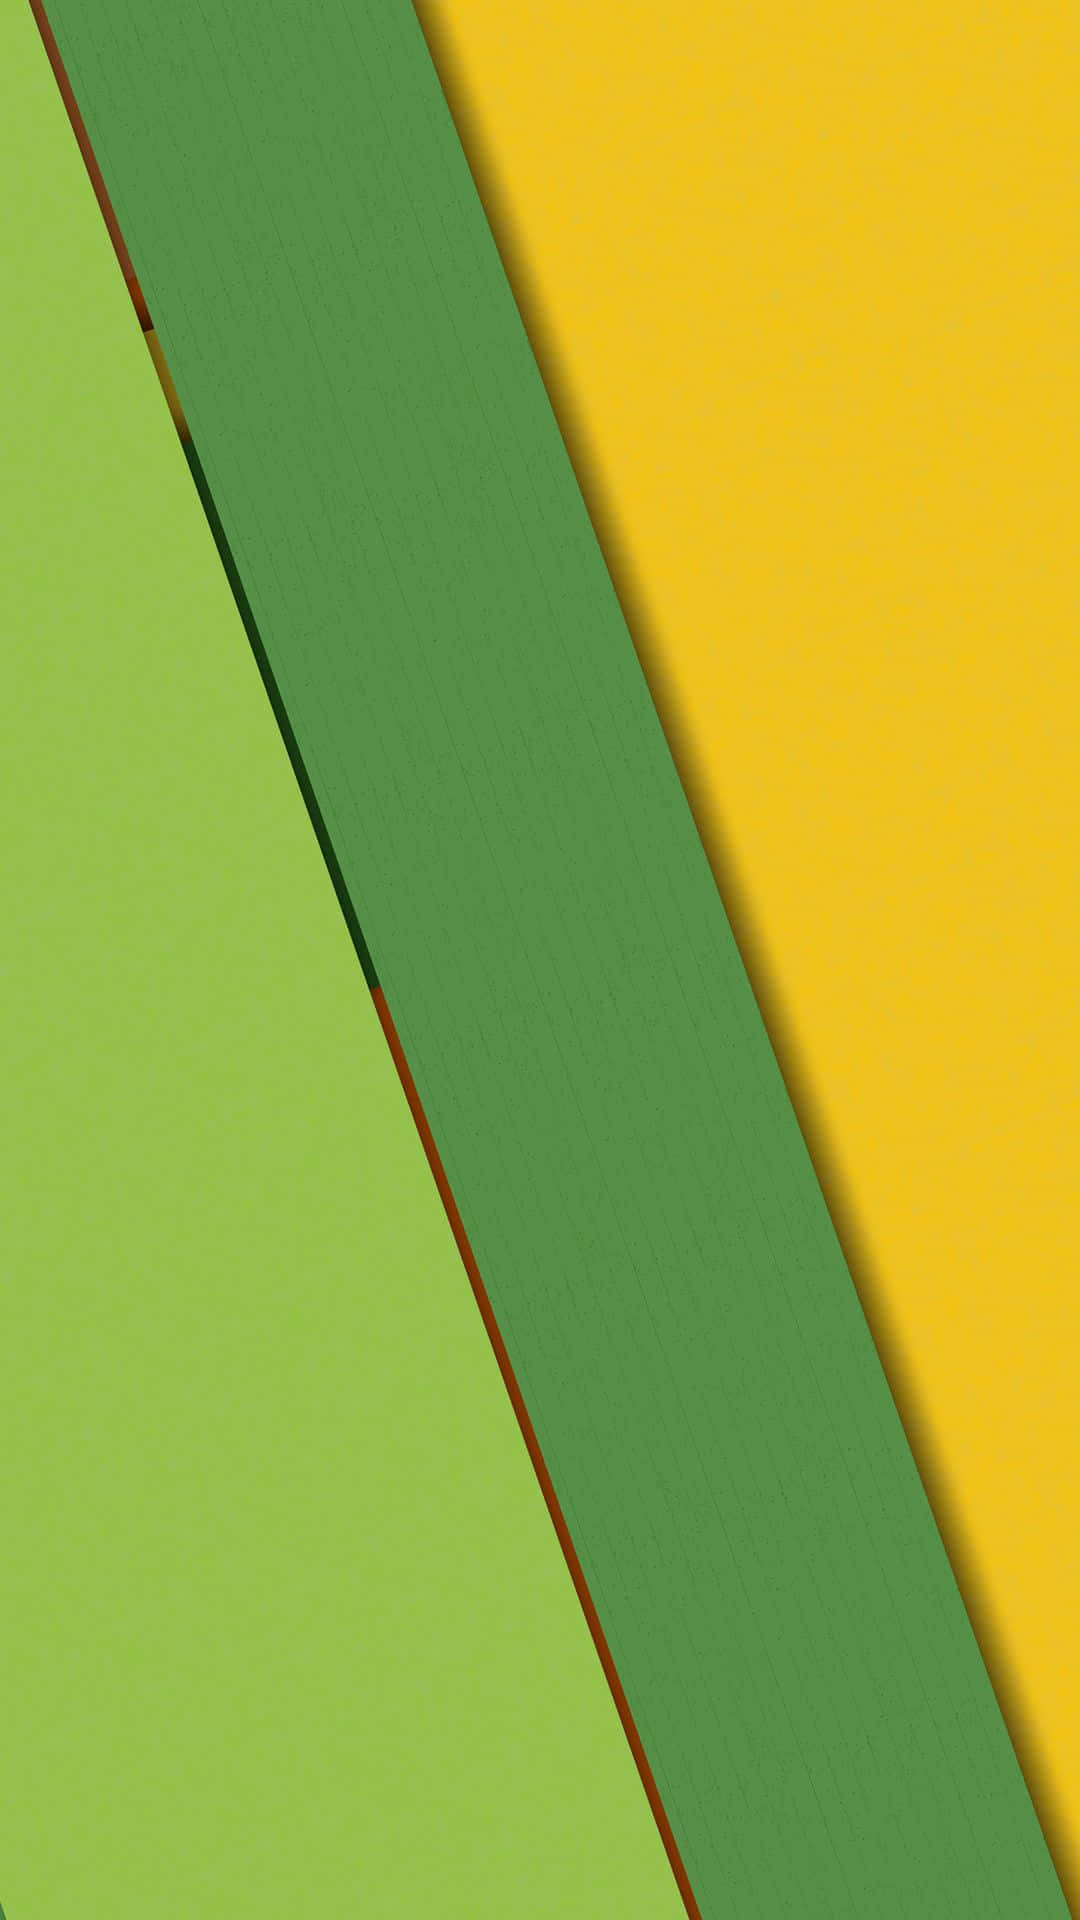 Yellow And Green Google Material Background